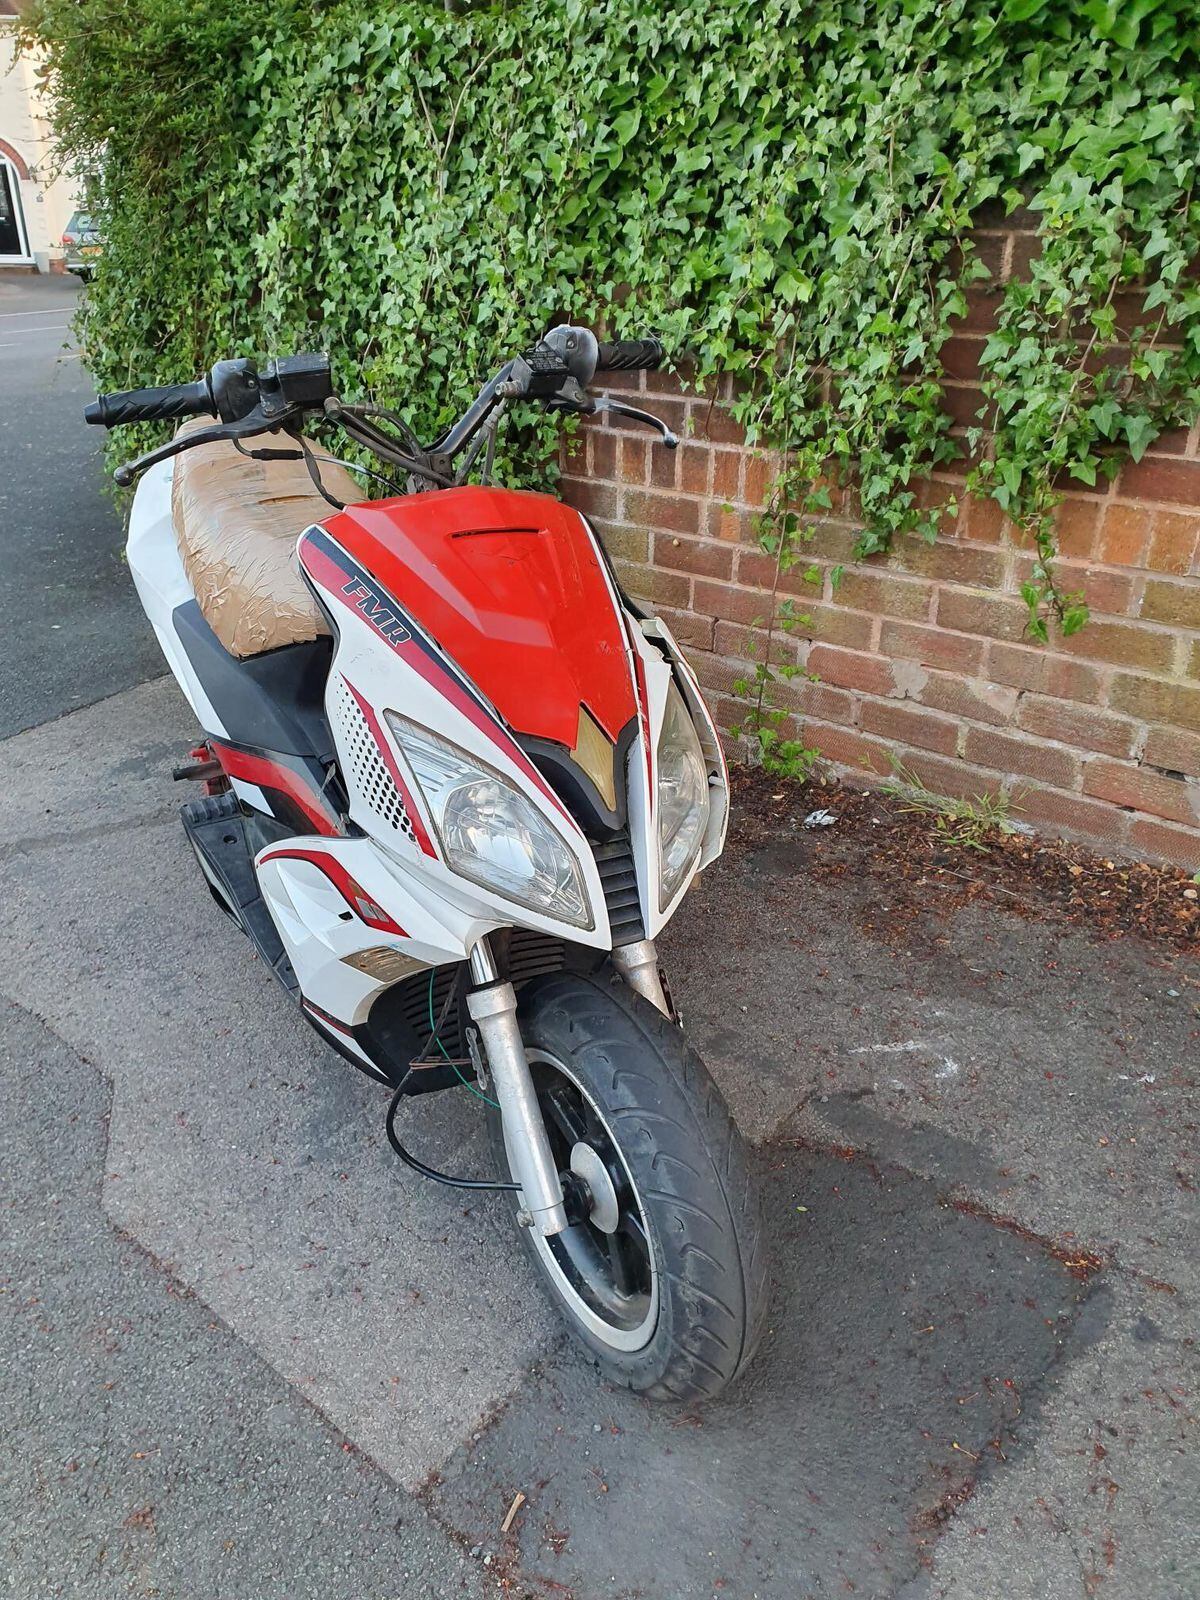 It was taken in a joint operation after the rider had been seen causing issues in the local community, Photo: Stourbridge Police